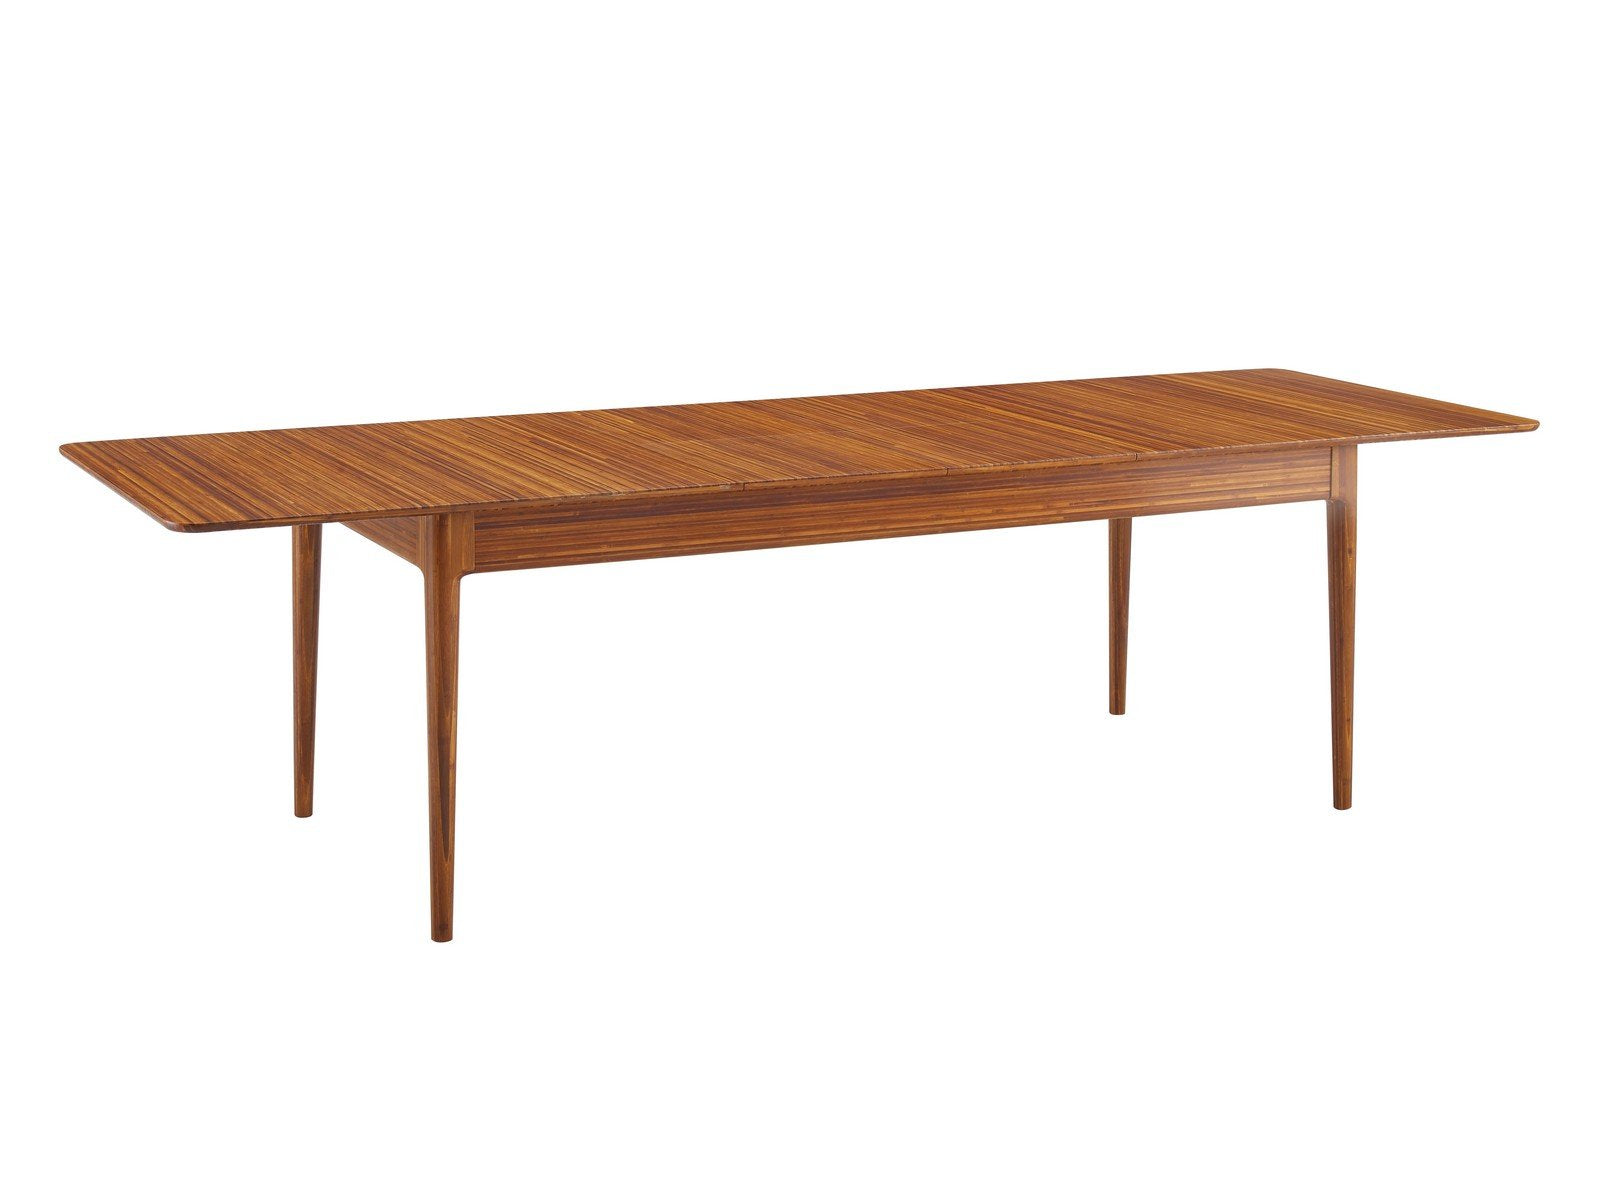 Greenington Erikka 110" Double-Leaves Extensible Dining Table, Amber - GE0001AM - 2